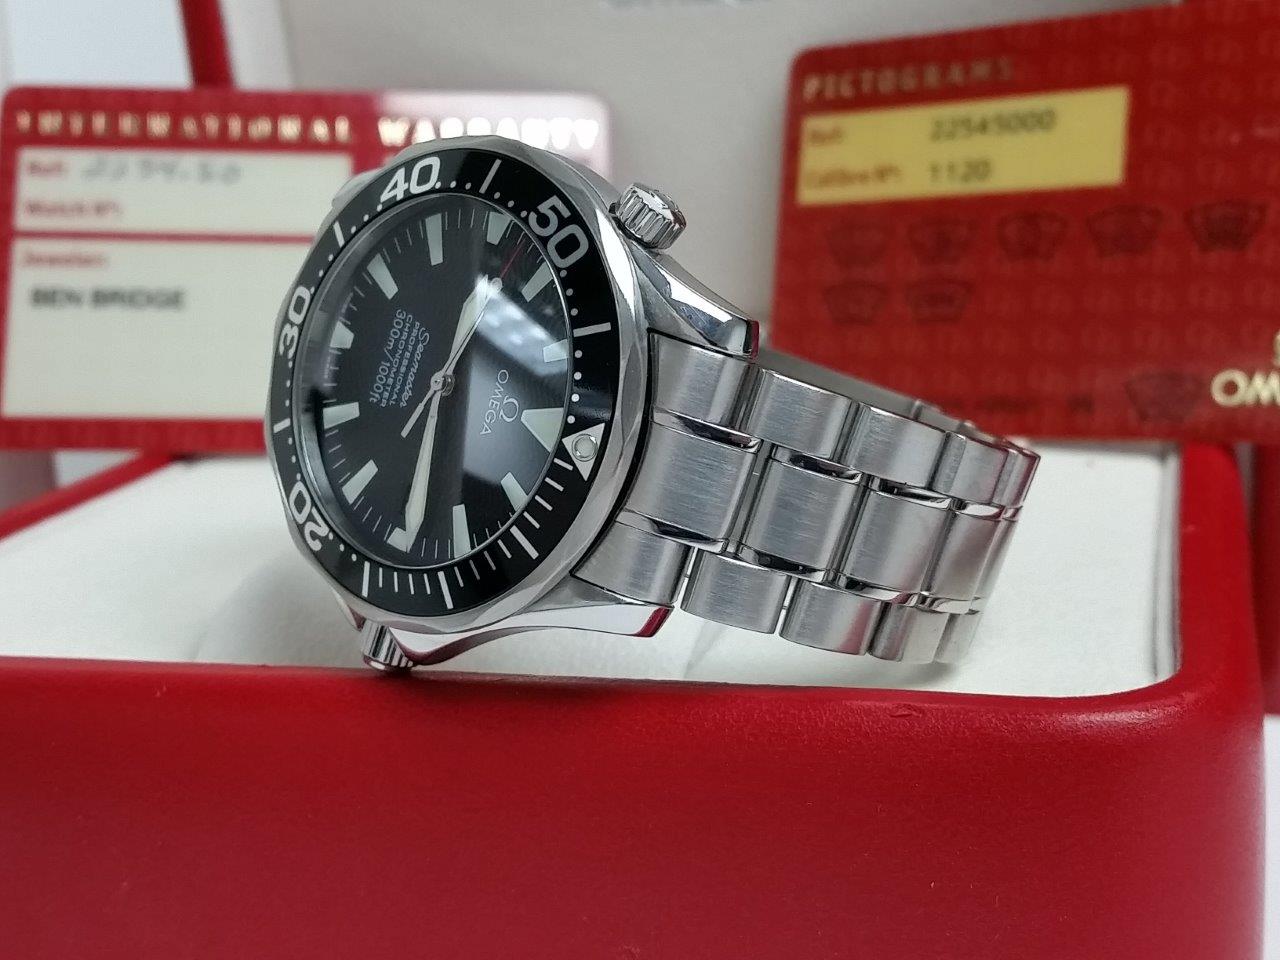 Omega Seamaster Pro Diver 300M Black Dial Sword Hands 2254.50.00 Box/Papers